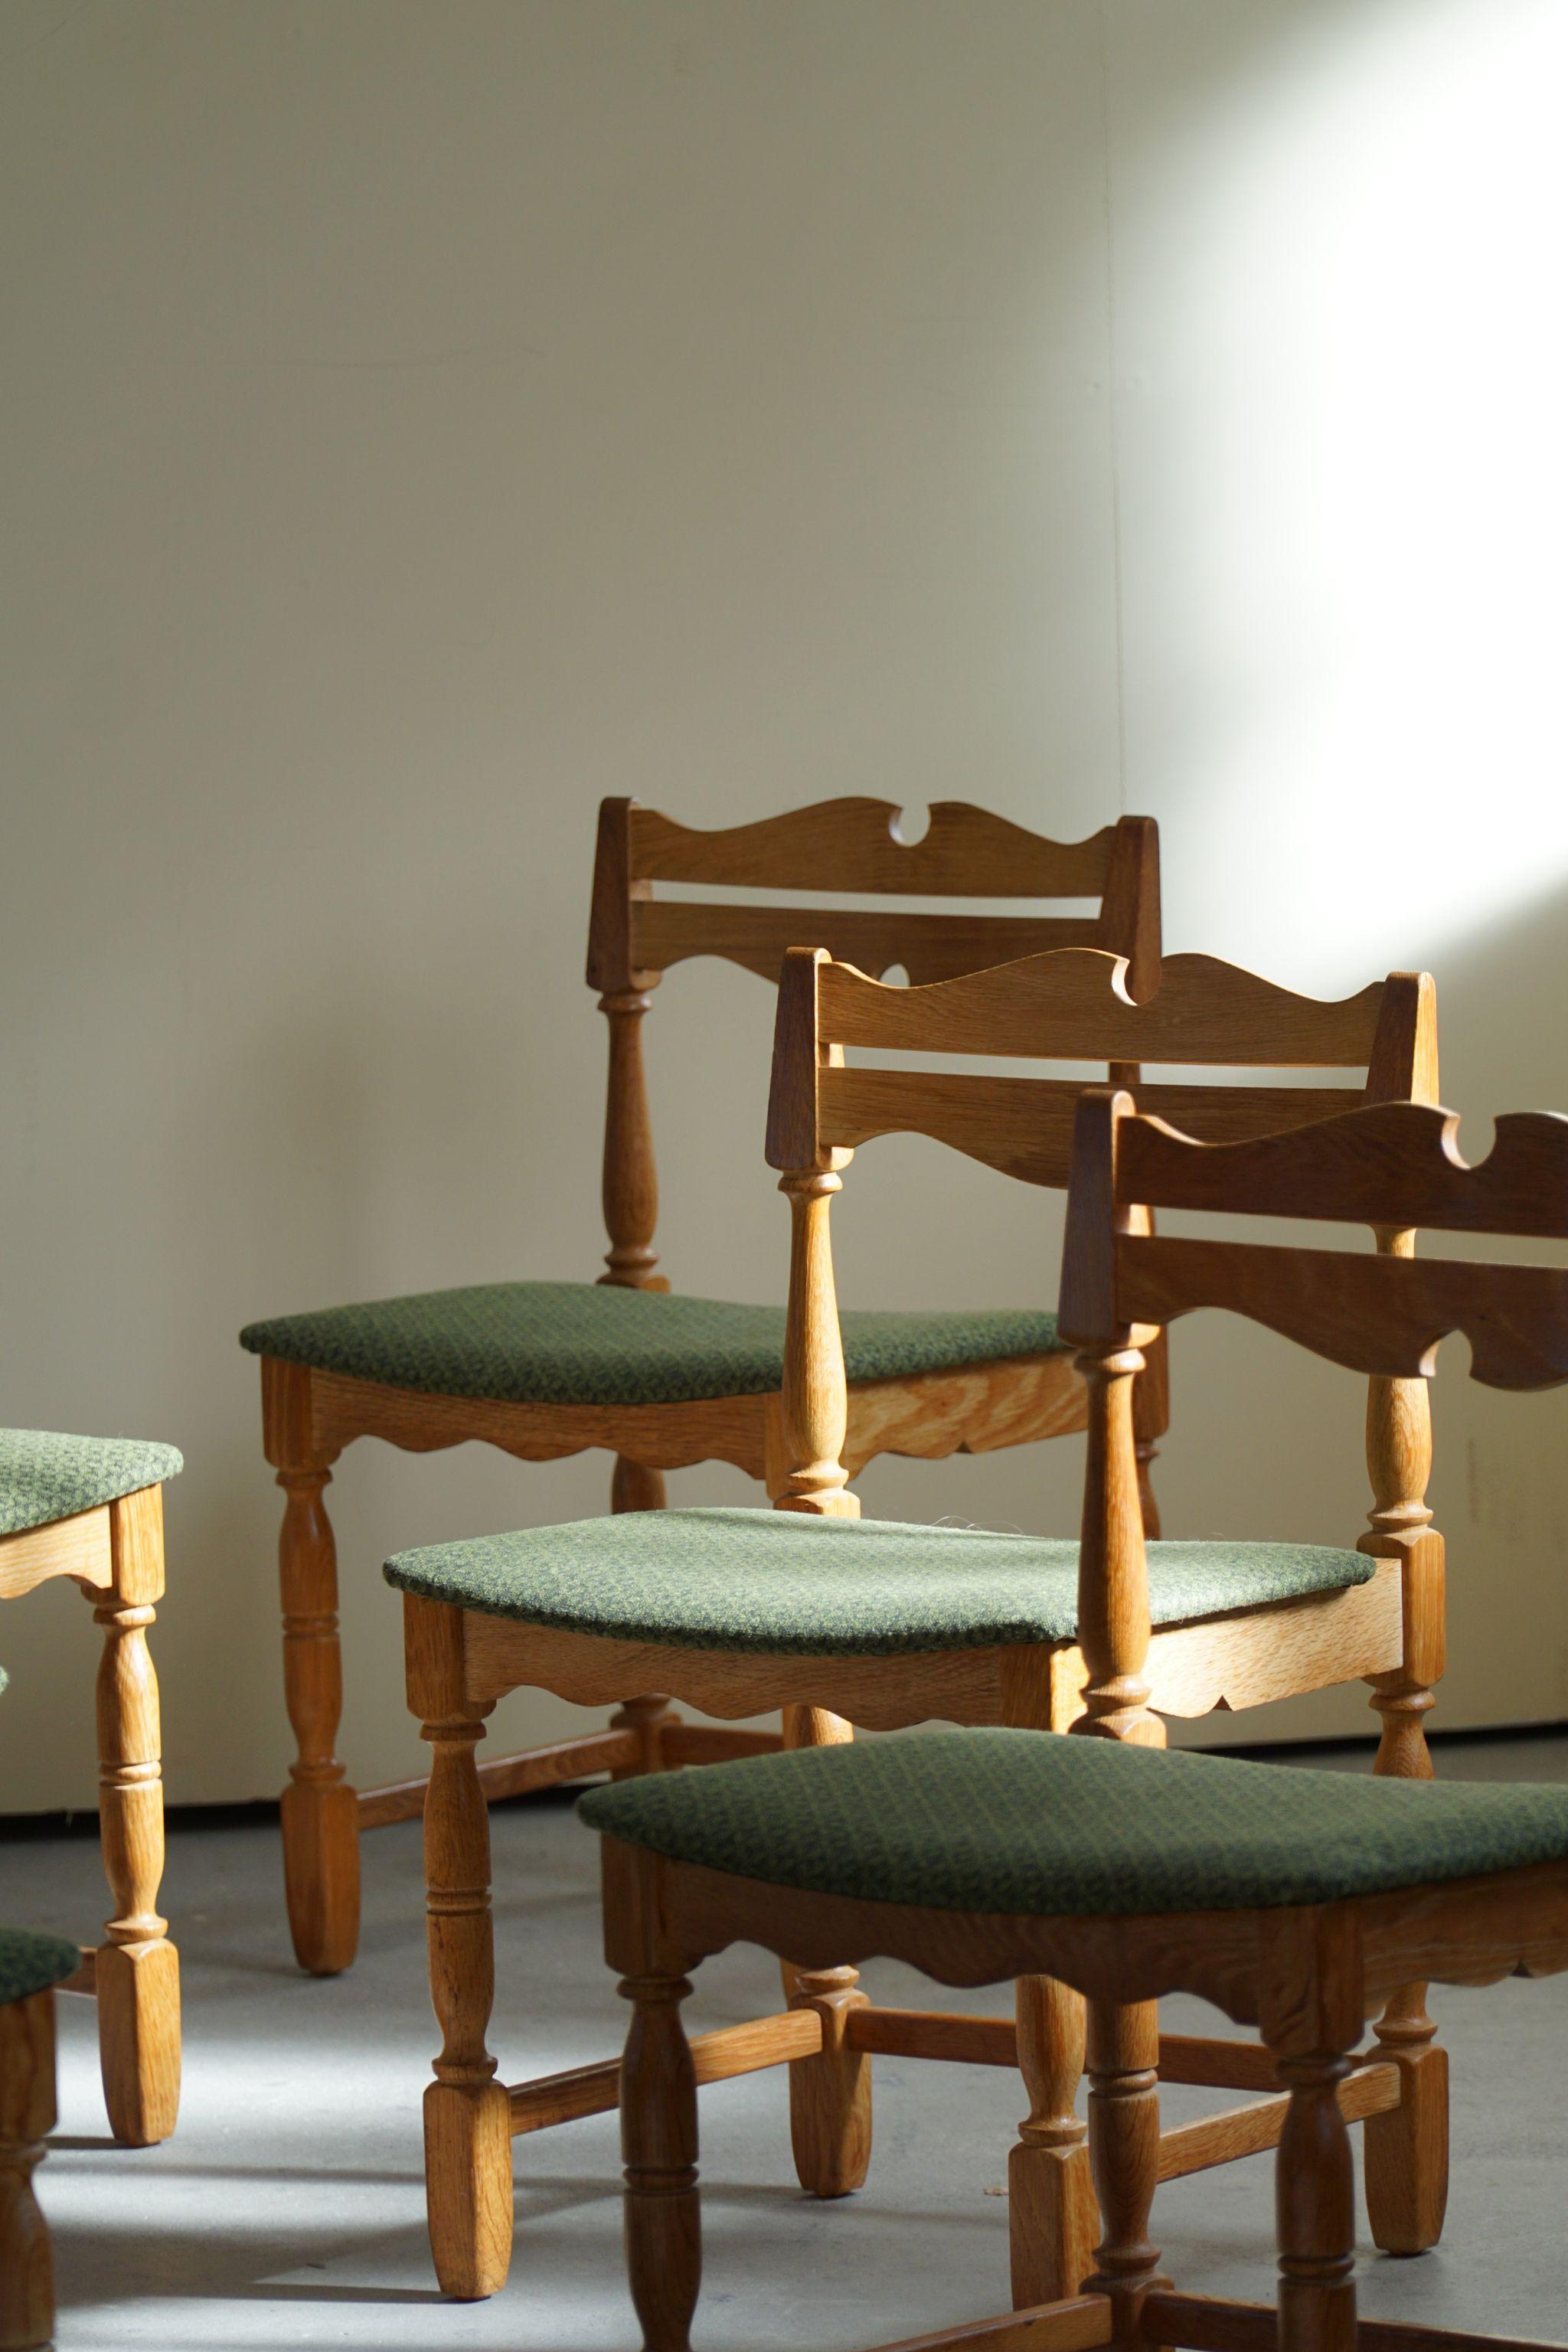 20th Century Mid-Century, Set of 6 Dining Chairs in Solid Oak by a Danish Cabinetmaker, 1950s